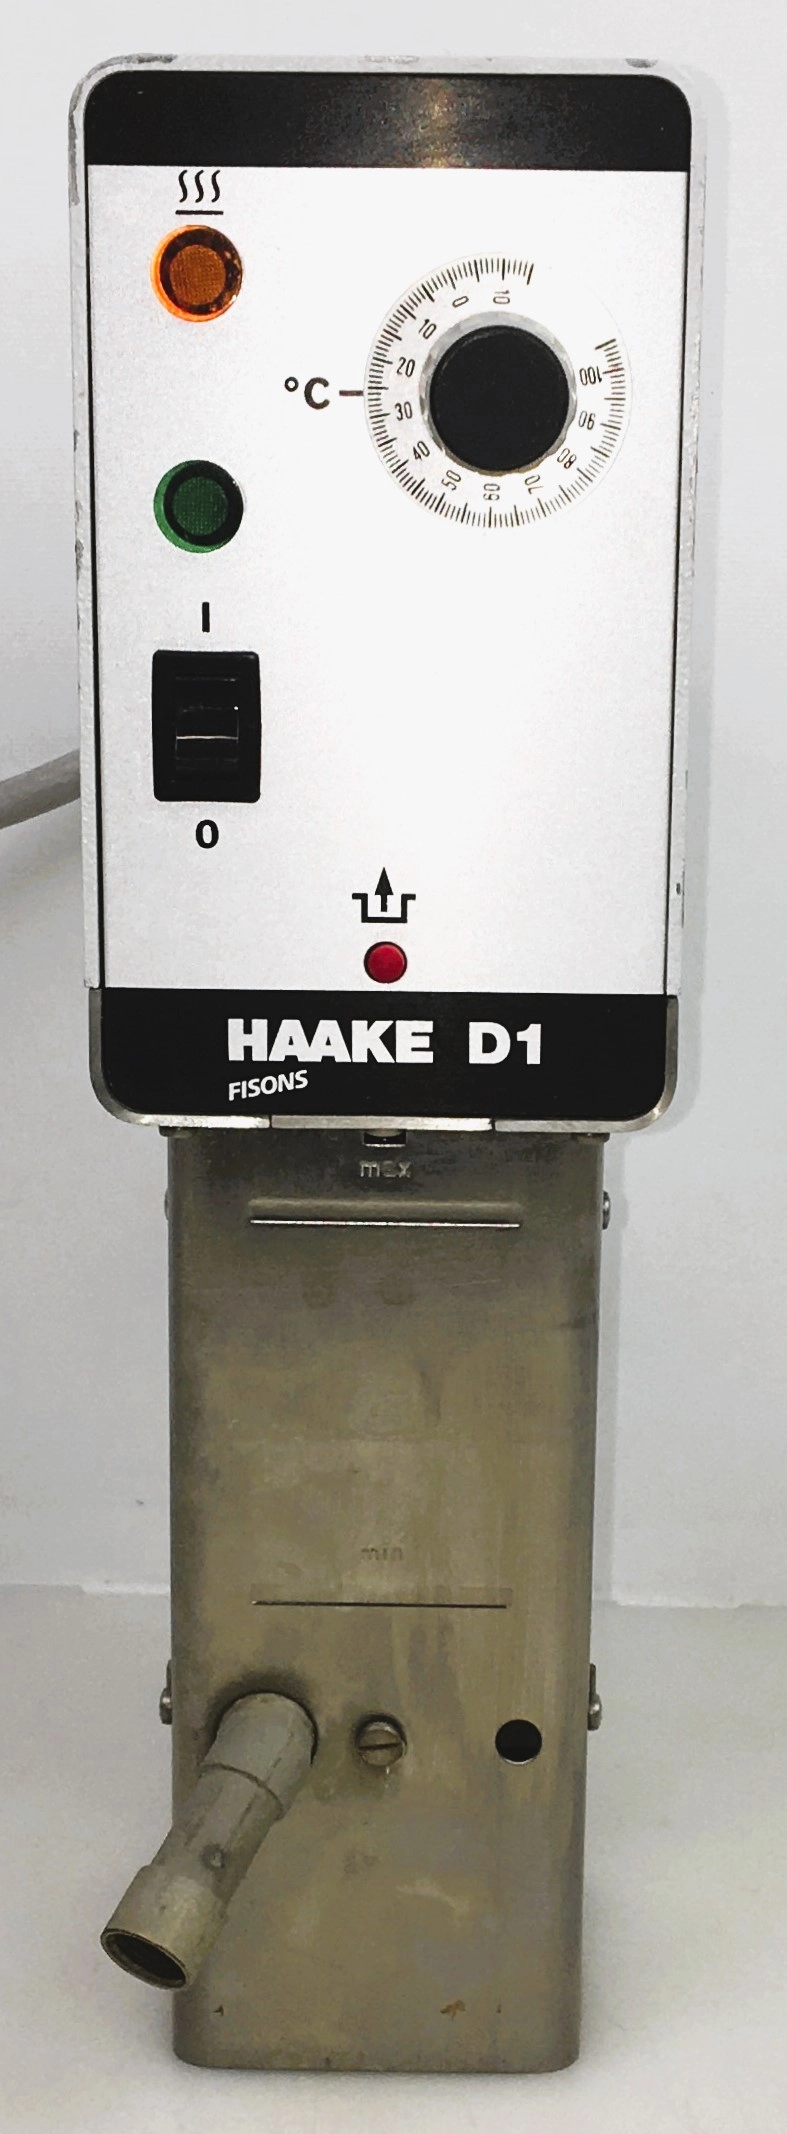 Haake (Fisons) D1 Immersion Circulator